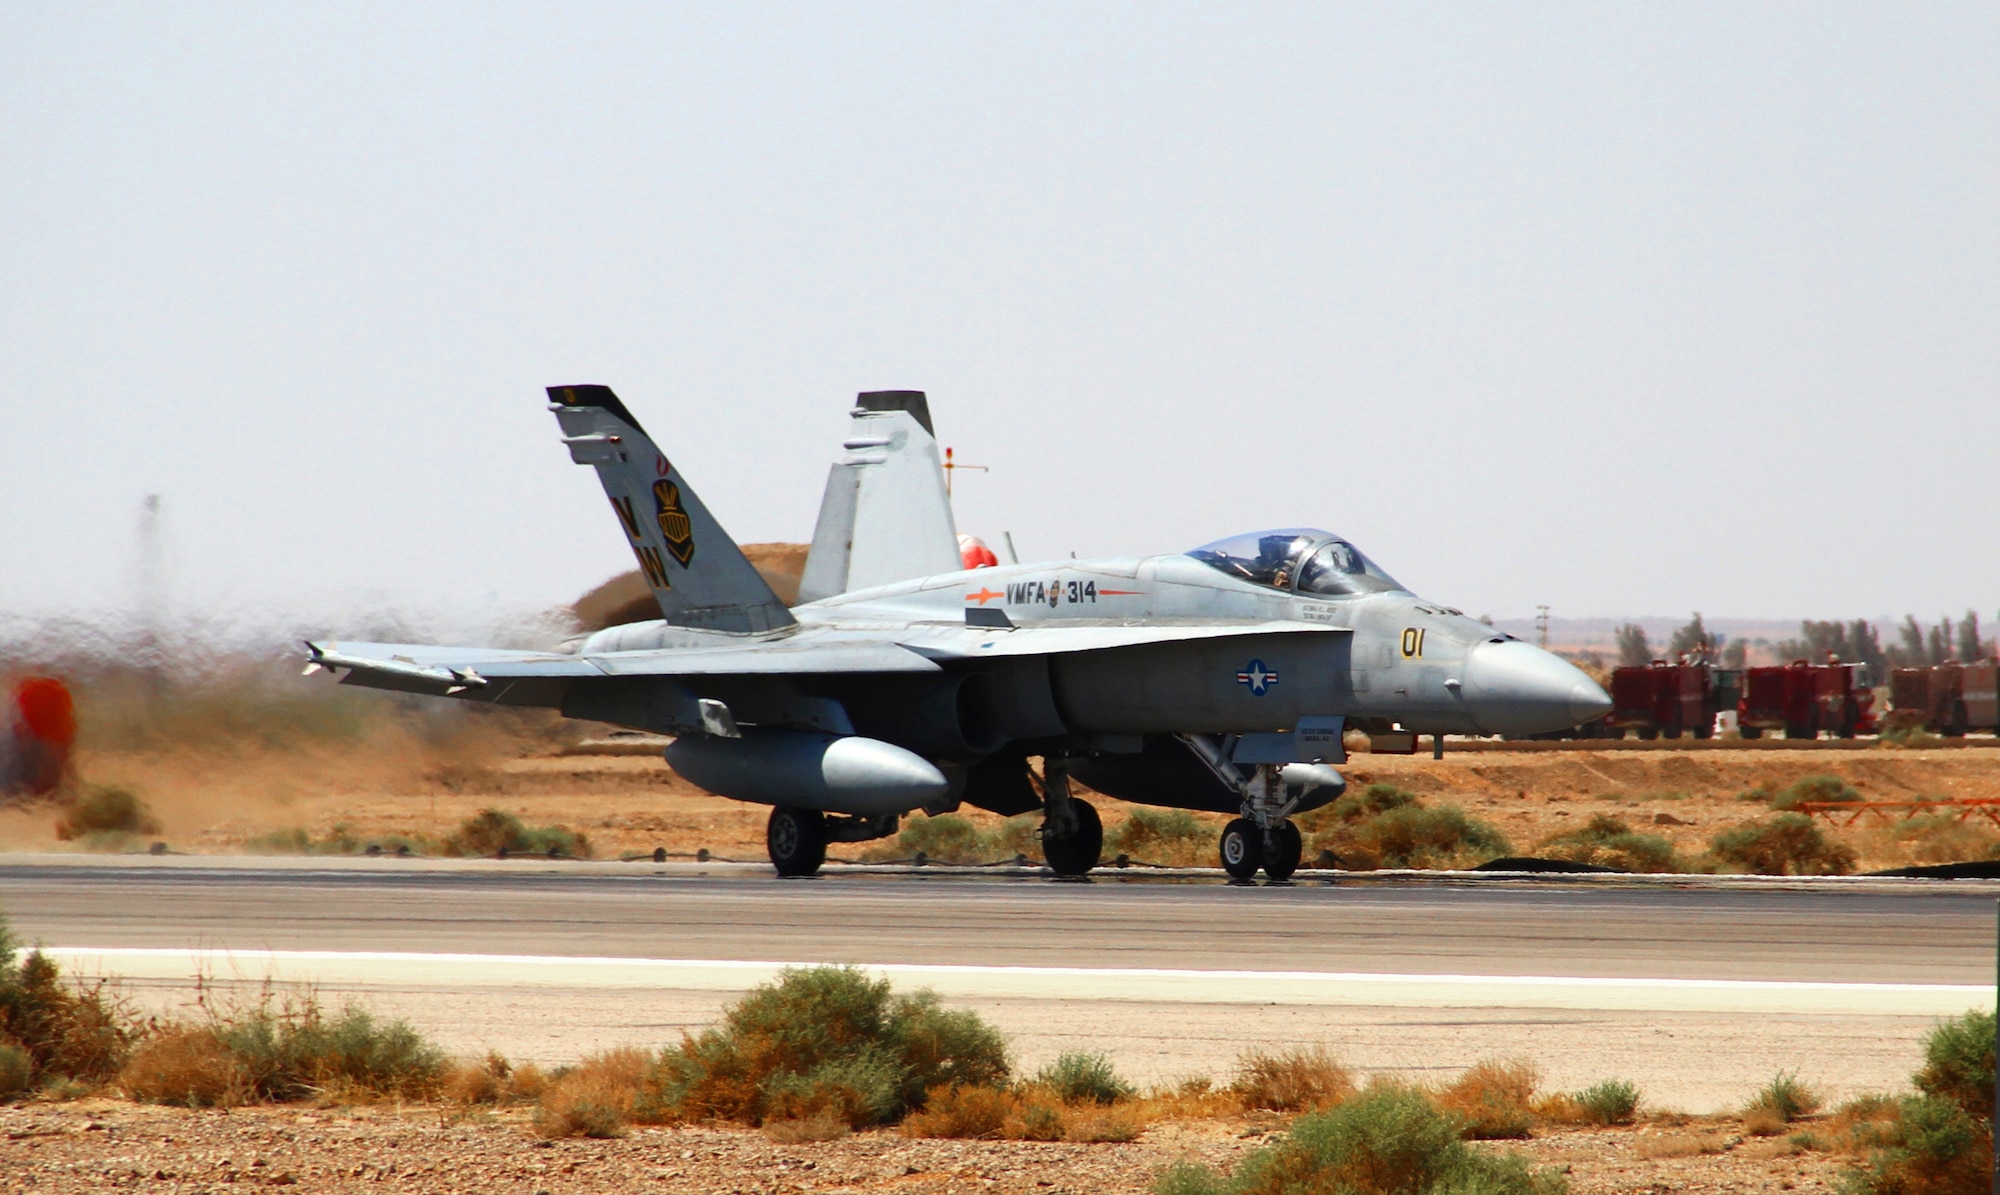 An F-18 Hornet from the U.S. Marine Corps Marine Air Group 50 taxis down a runway to join flying operations during Exercise Eager Tiger May 11, 2014, at an air base in northern Jordan. This exercise provides fighter pilots from the U.S. and Jordanian militaries a chance to conduct joint operations which enhance interoperability. (U.S. Air Force photo/Staff Sgt. Tyler McLain/Released)